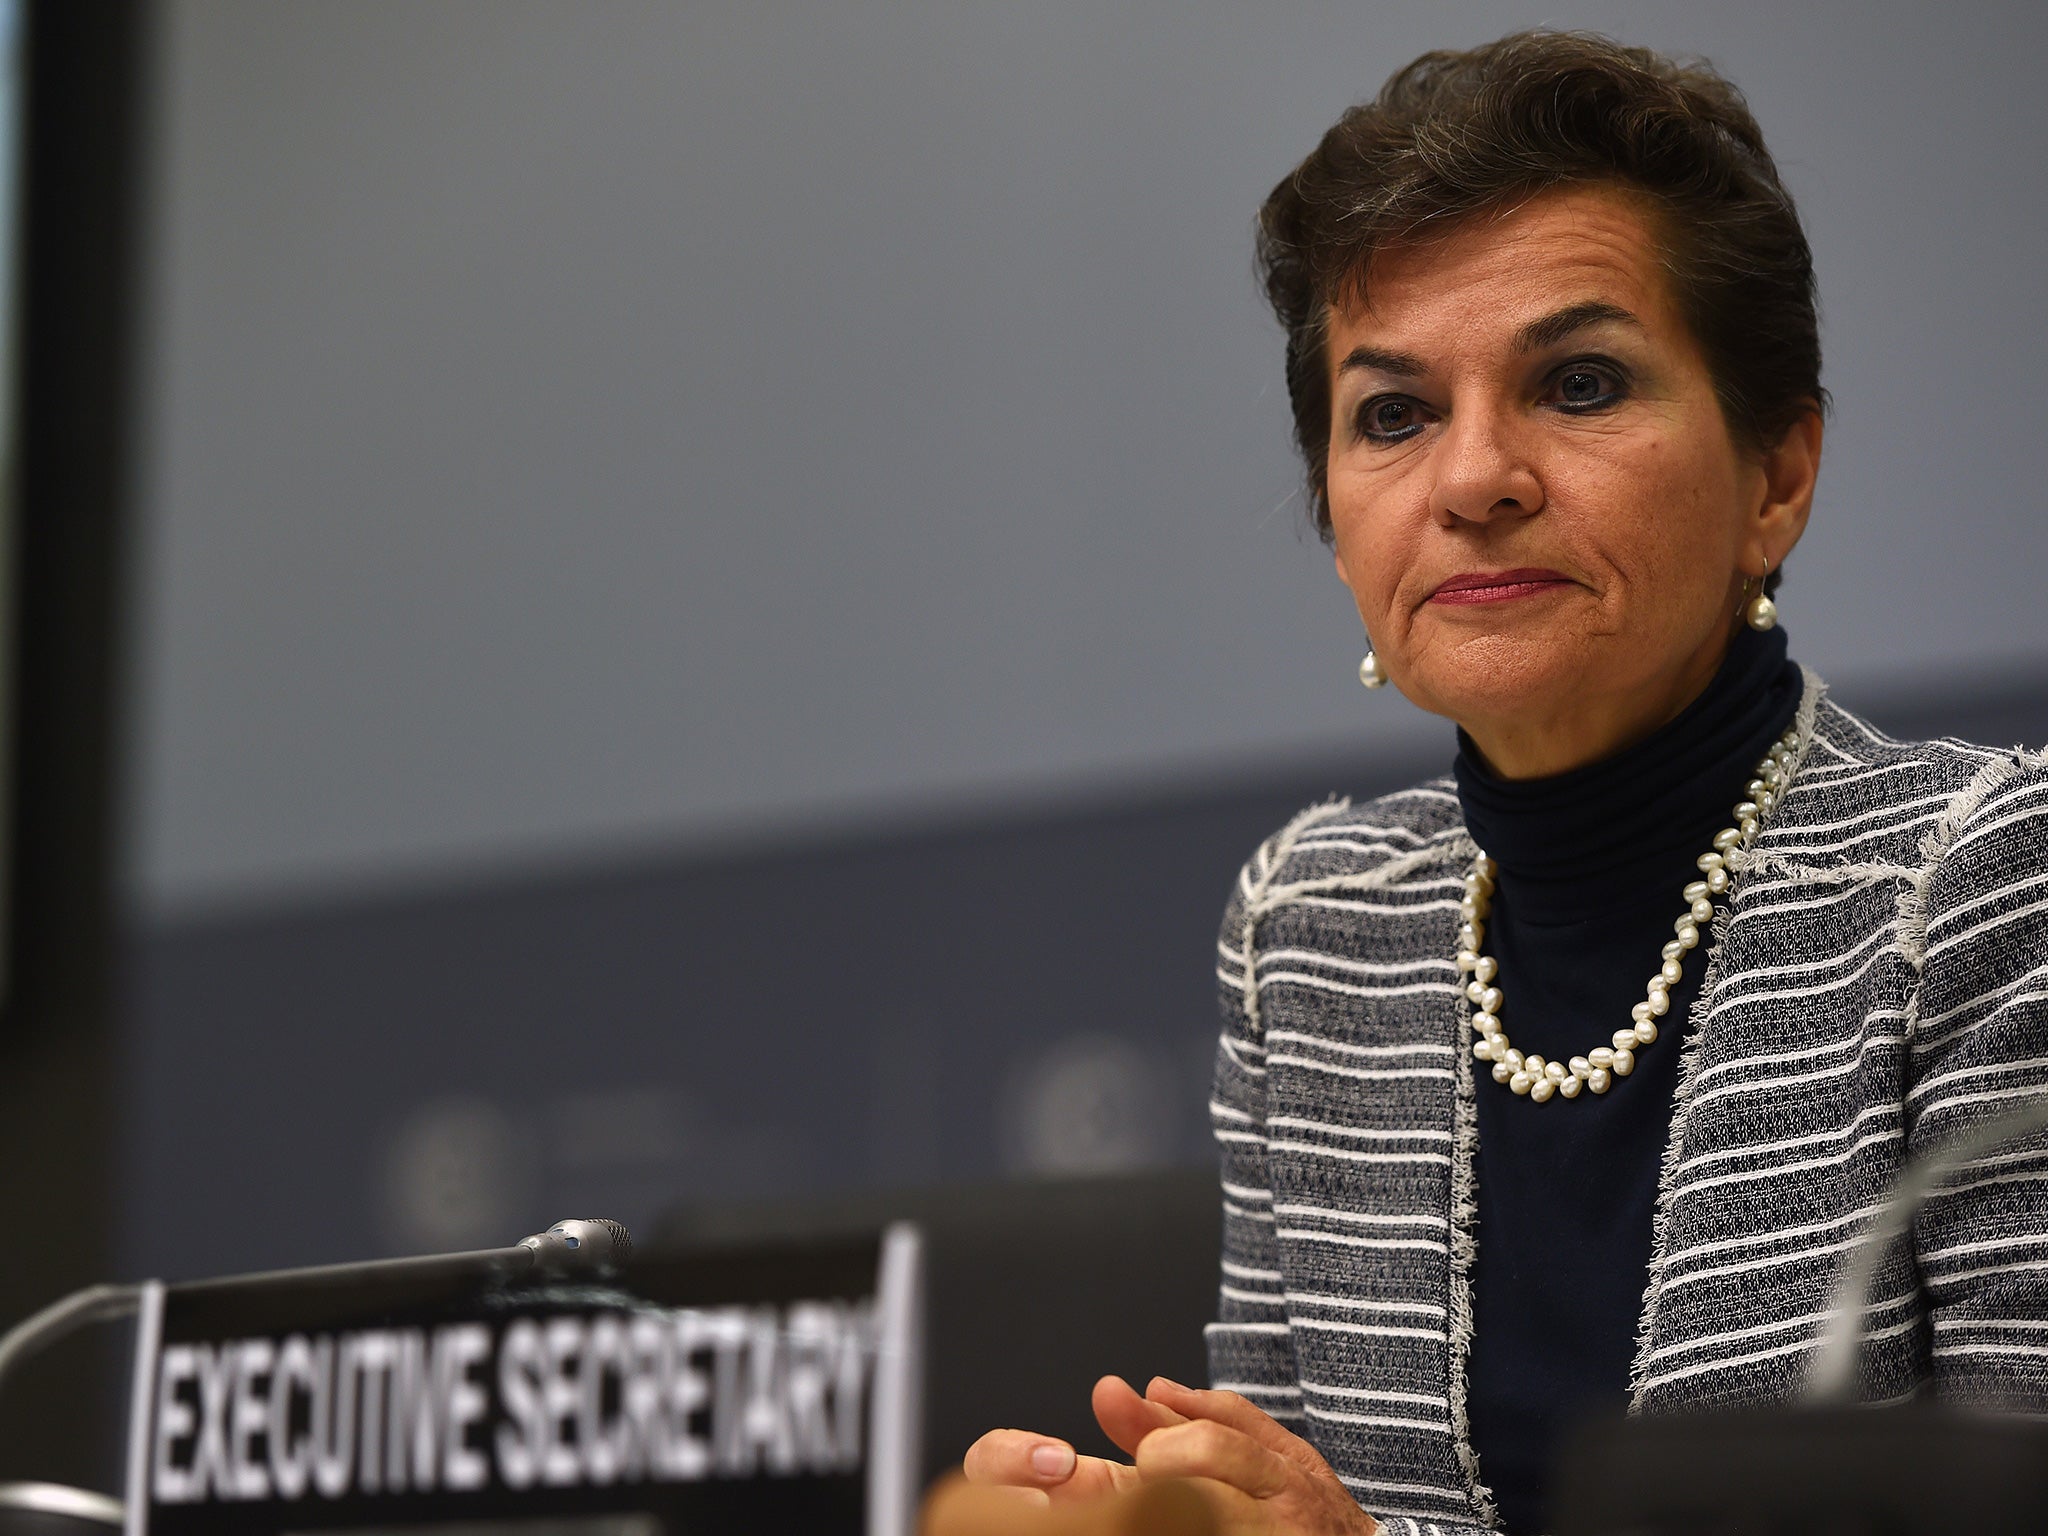 Christiana Figueres is the Costa Rican diplomat credited with sealing the Paris Agreement deal in 2015